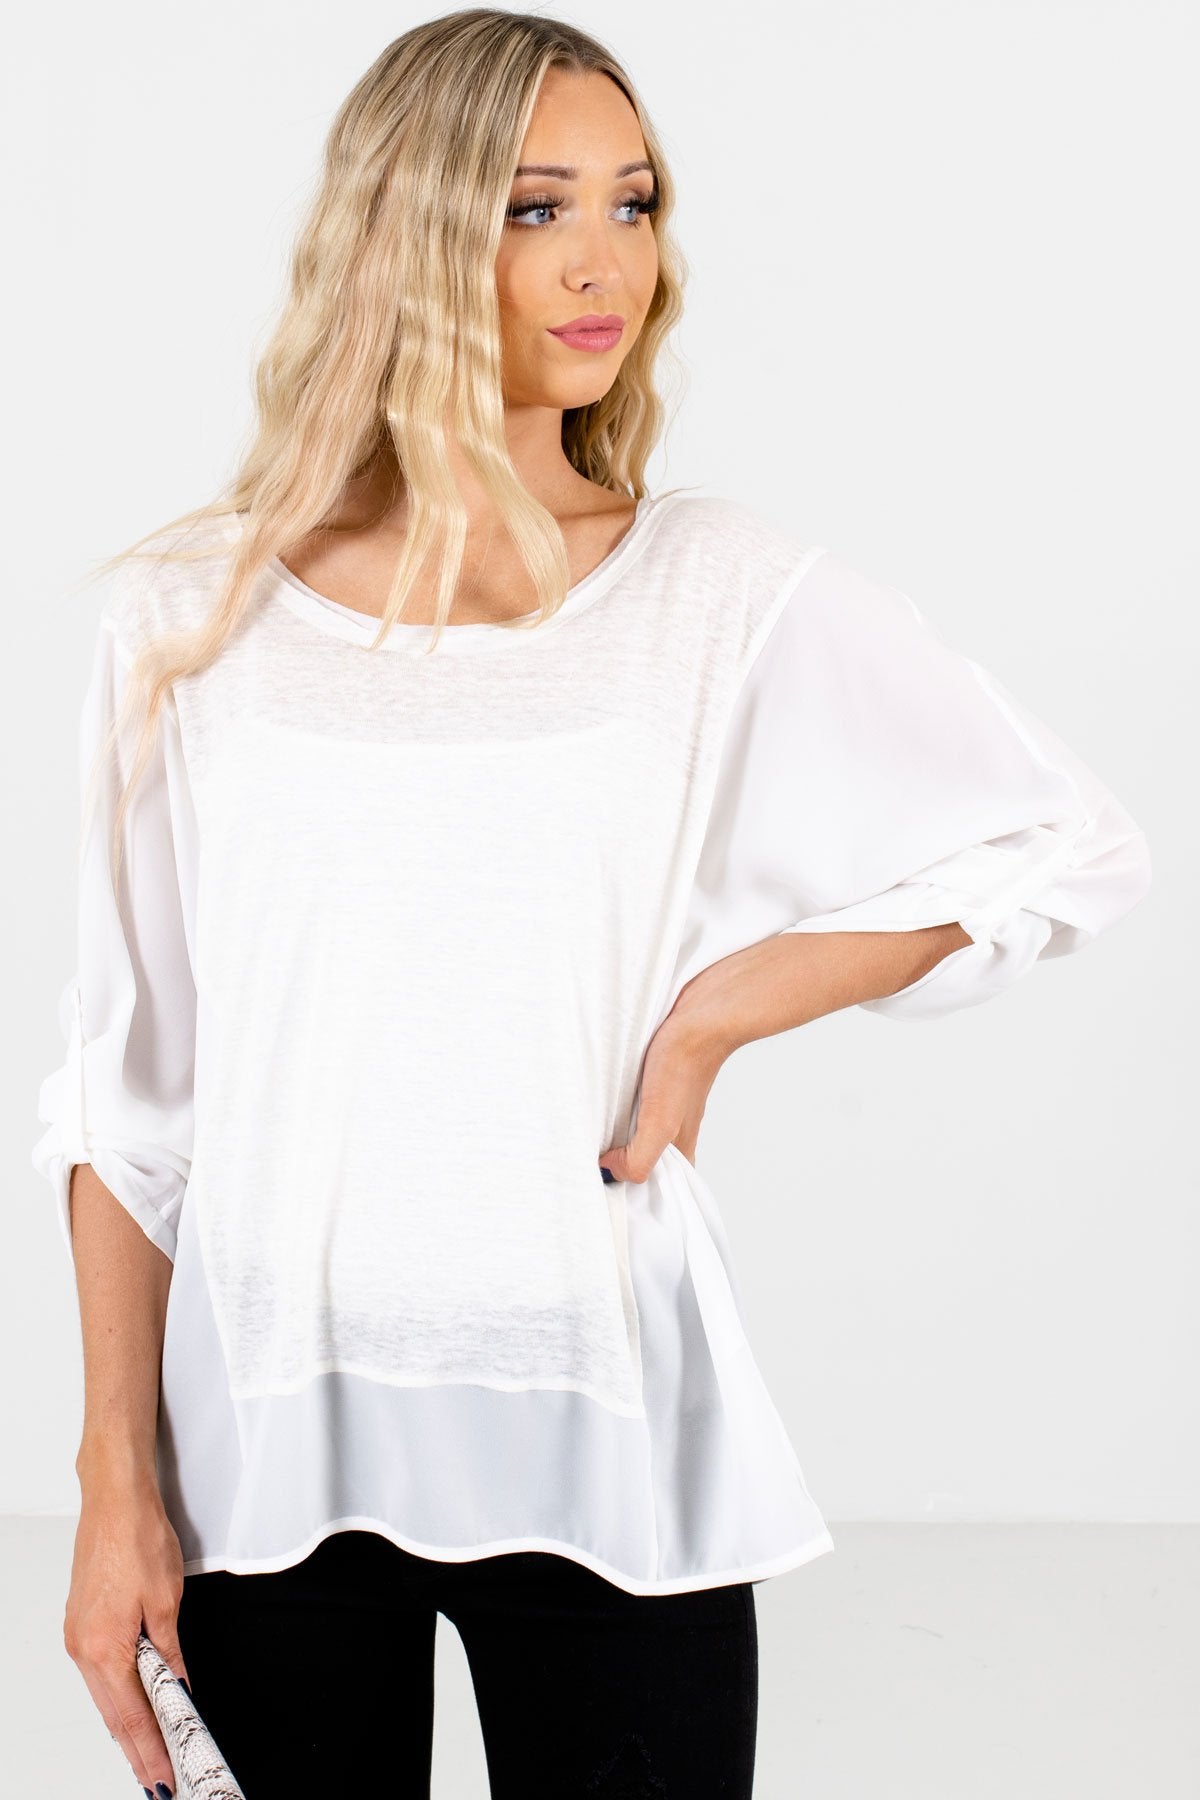 White High-Quality Lightweight Material Boutique Tops for Women